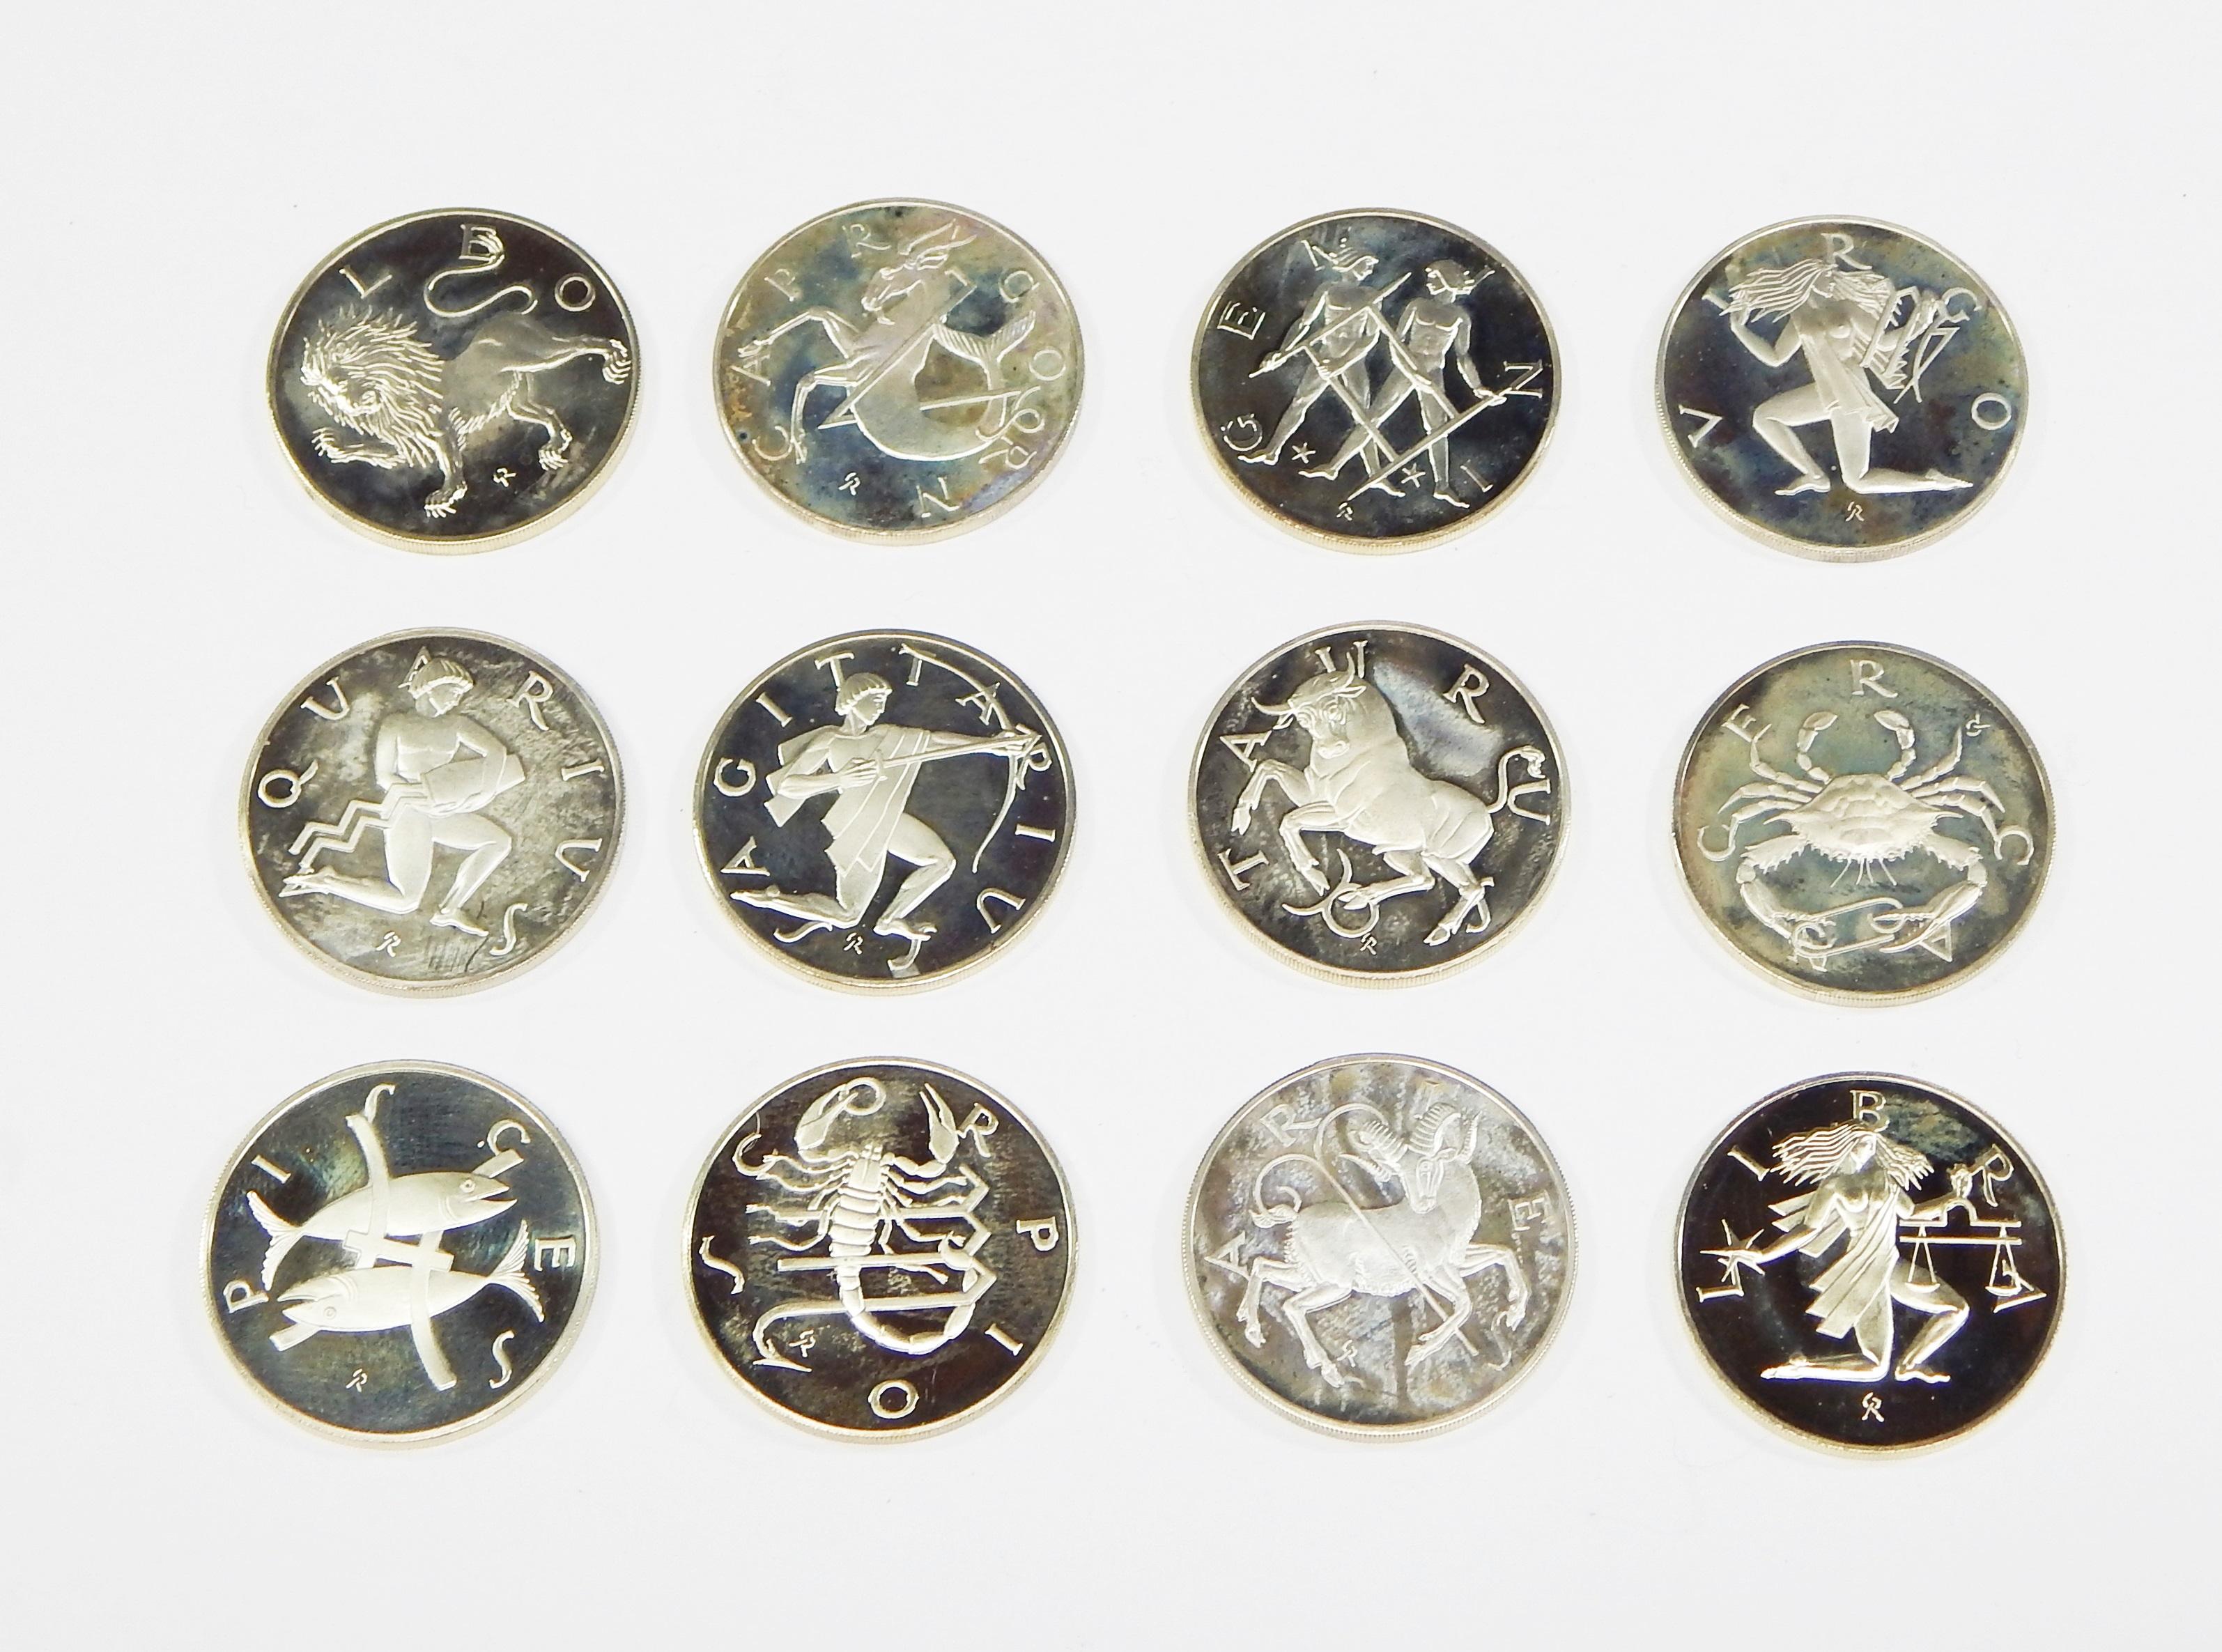 12 COINS of the ZODIAC SET - STERLING SILVER ROUNDS - 5.5 TROY OUNCES